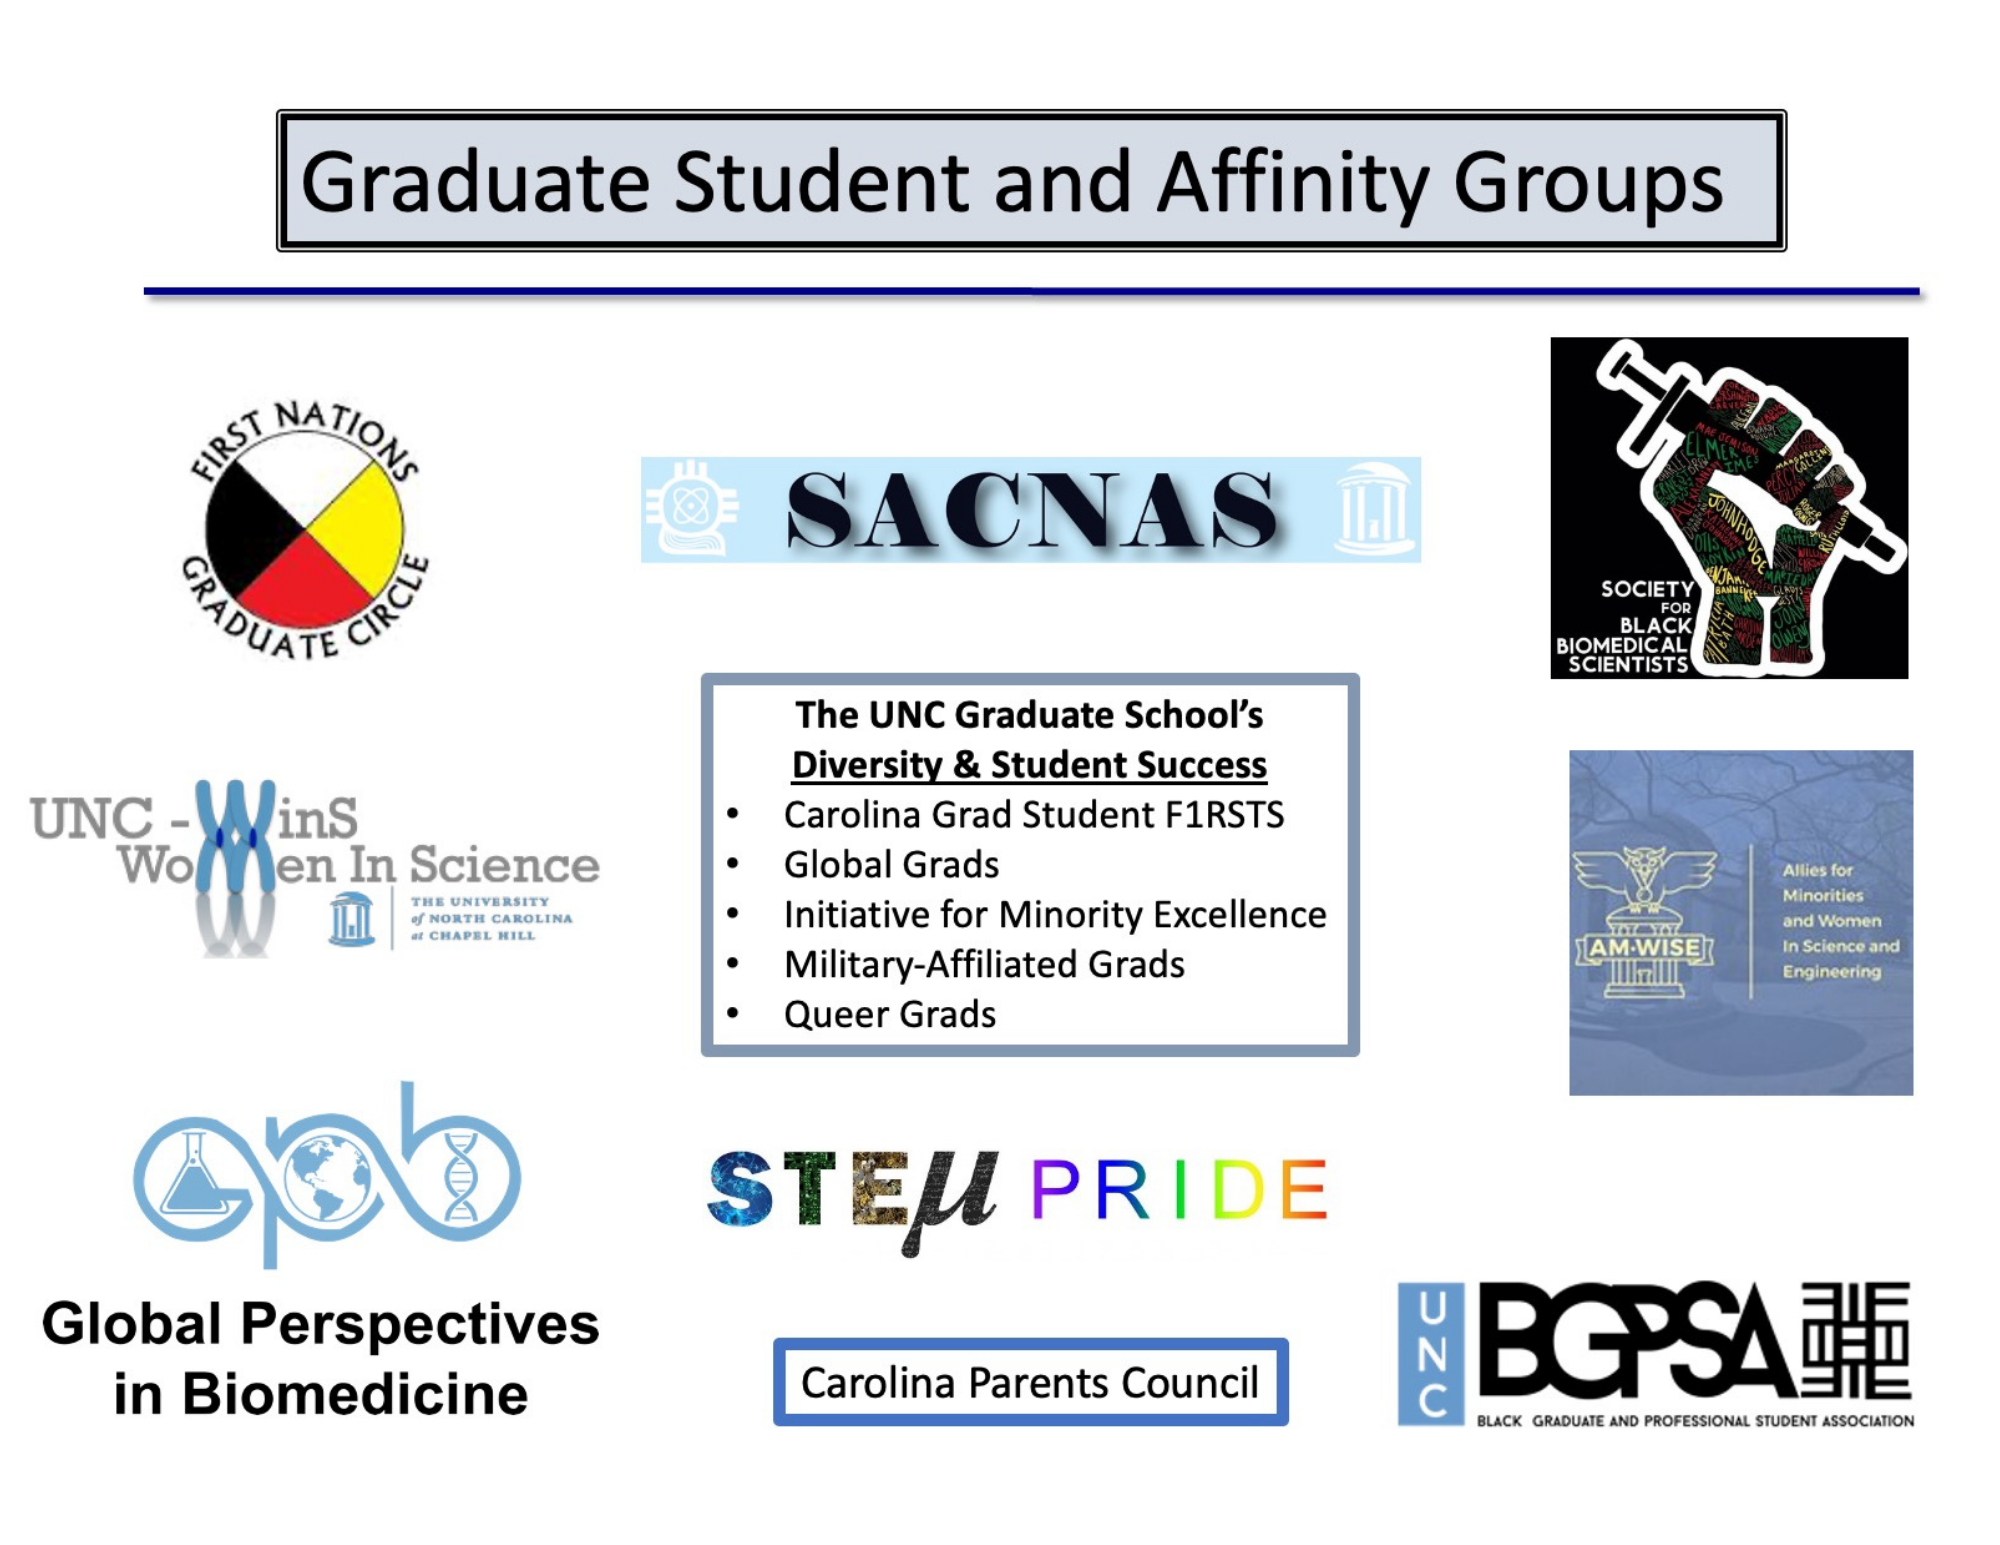 Logos of Graduate Student and Affinity Groups popular amongst biomedical trainees.